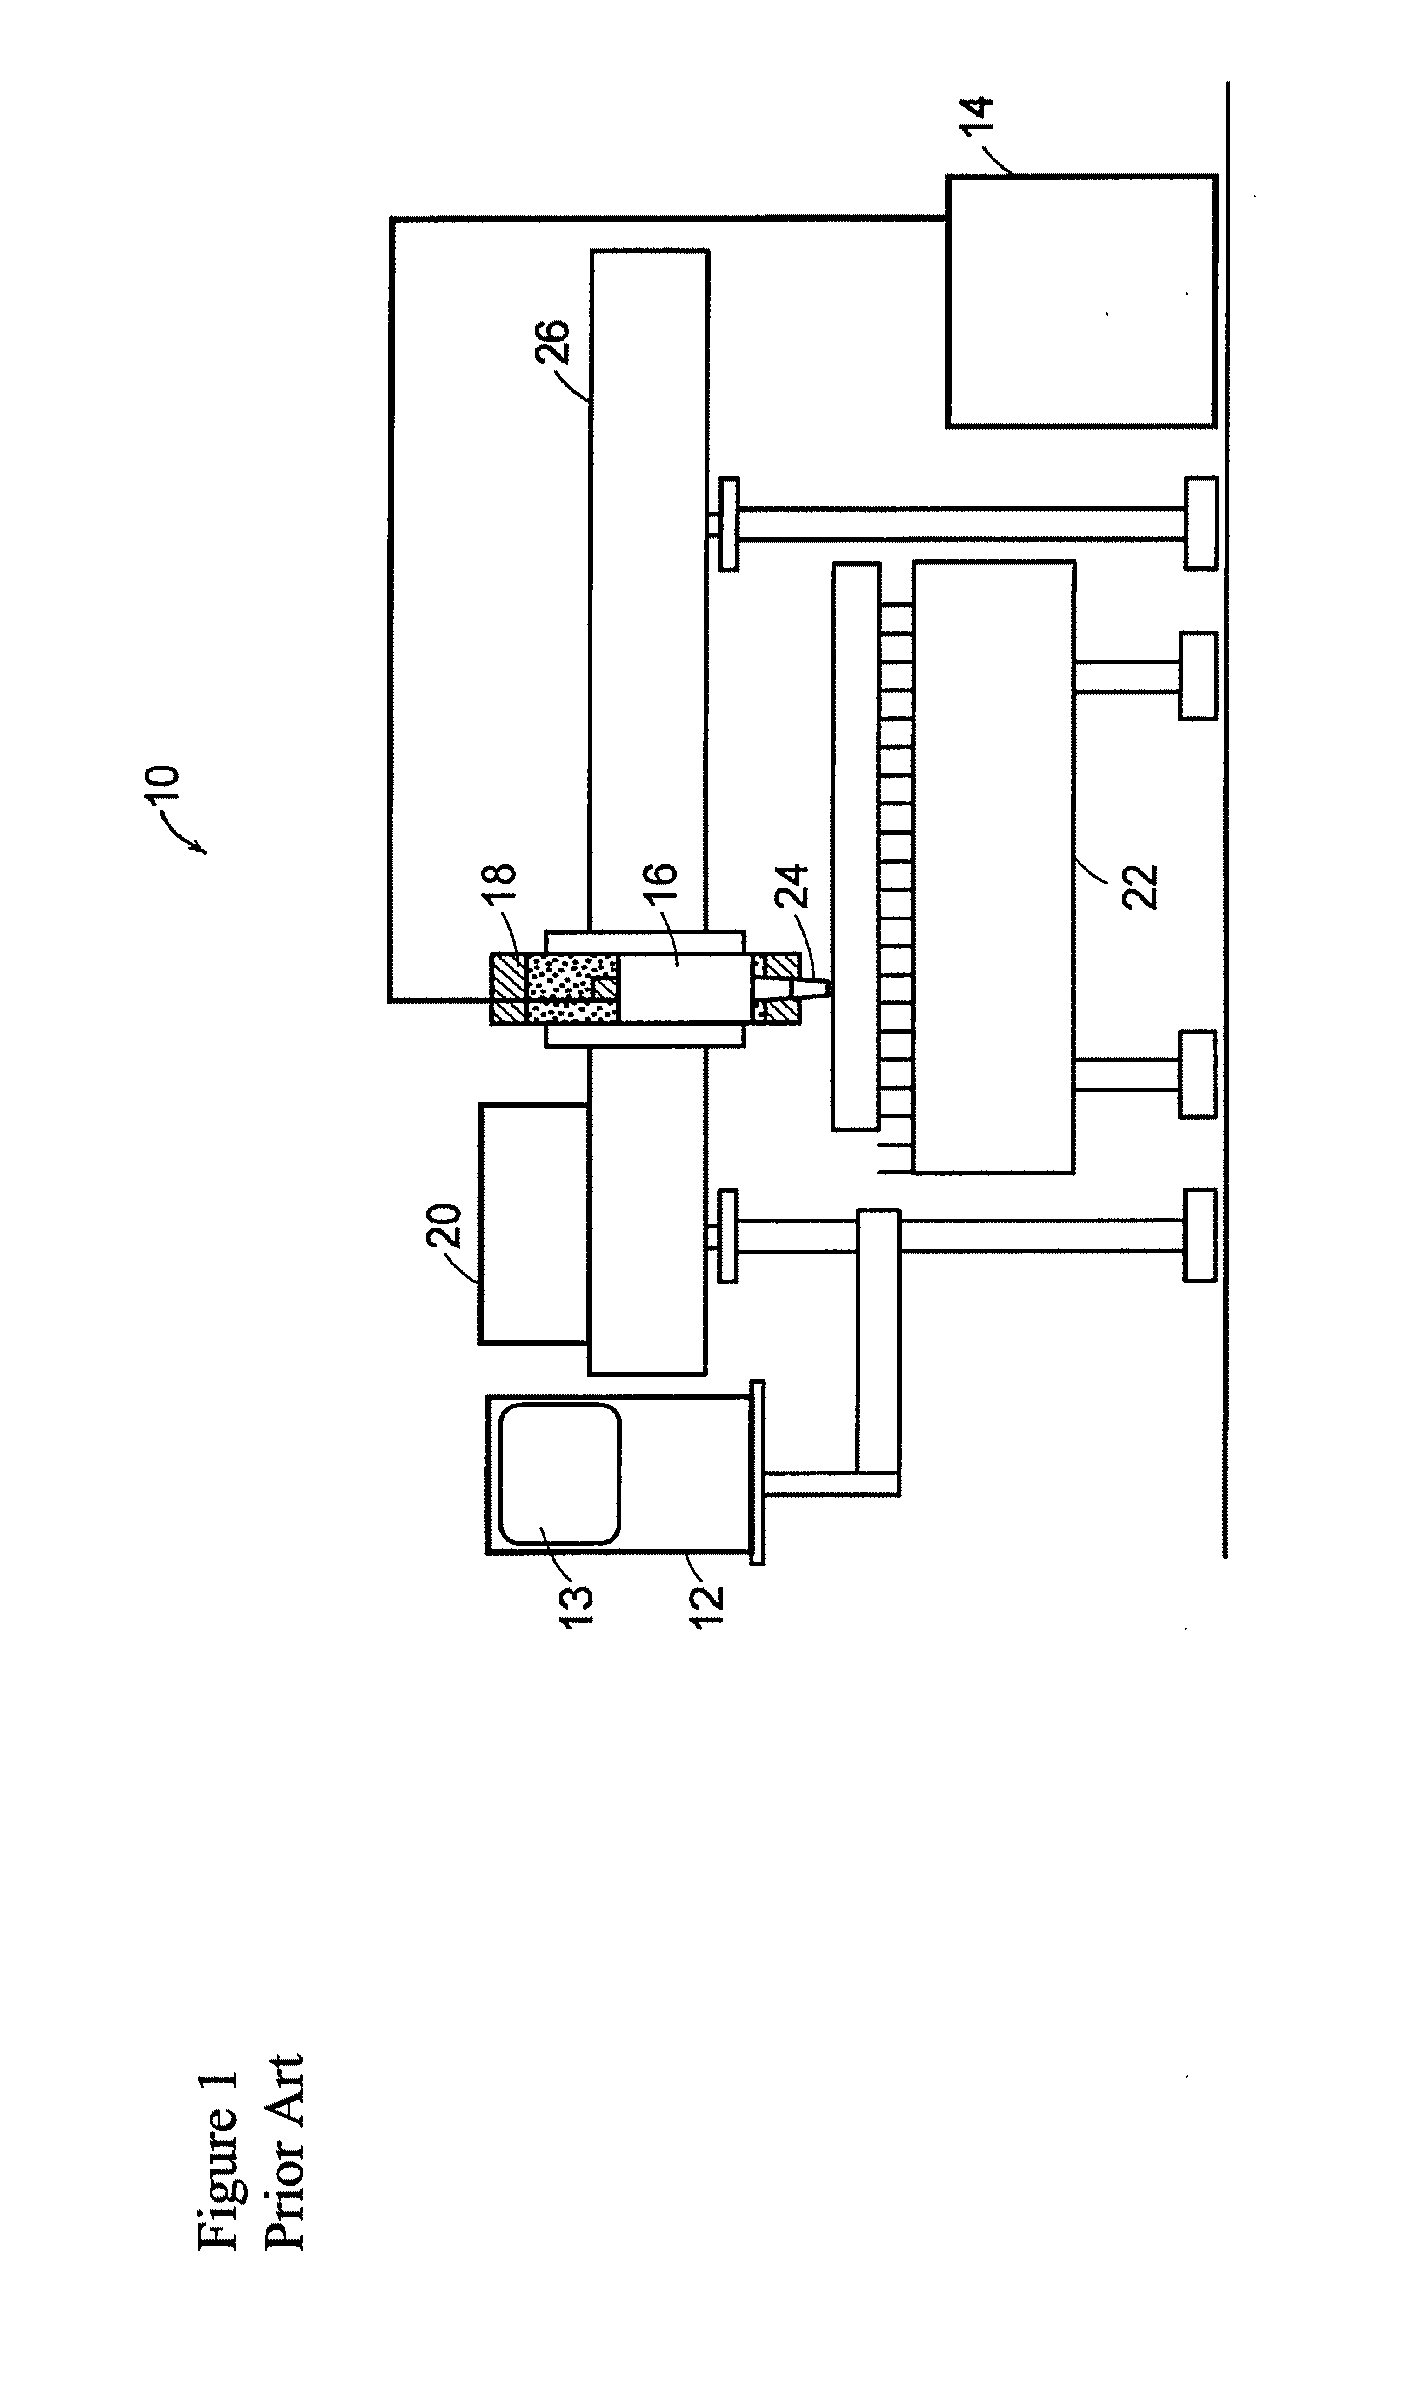 High quality hole cutting using variable shield gas compositions